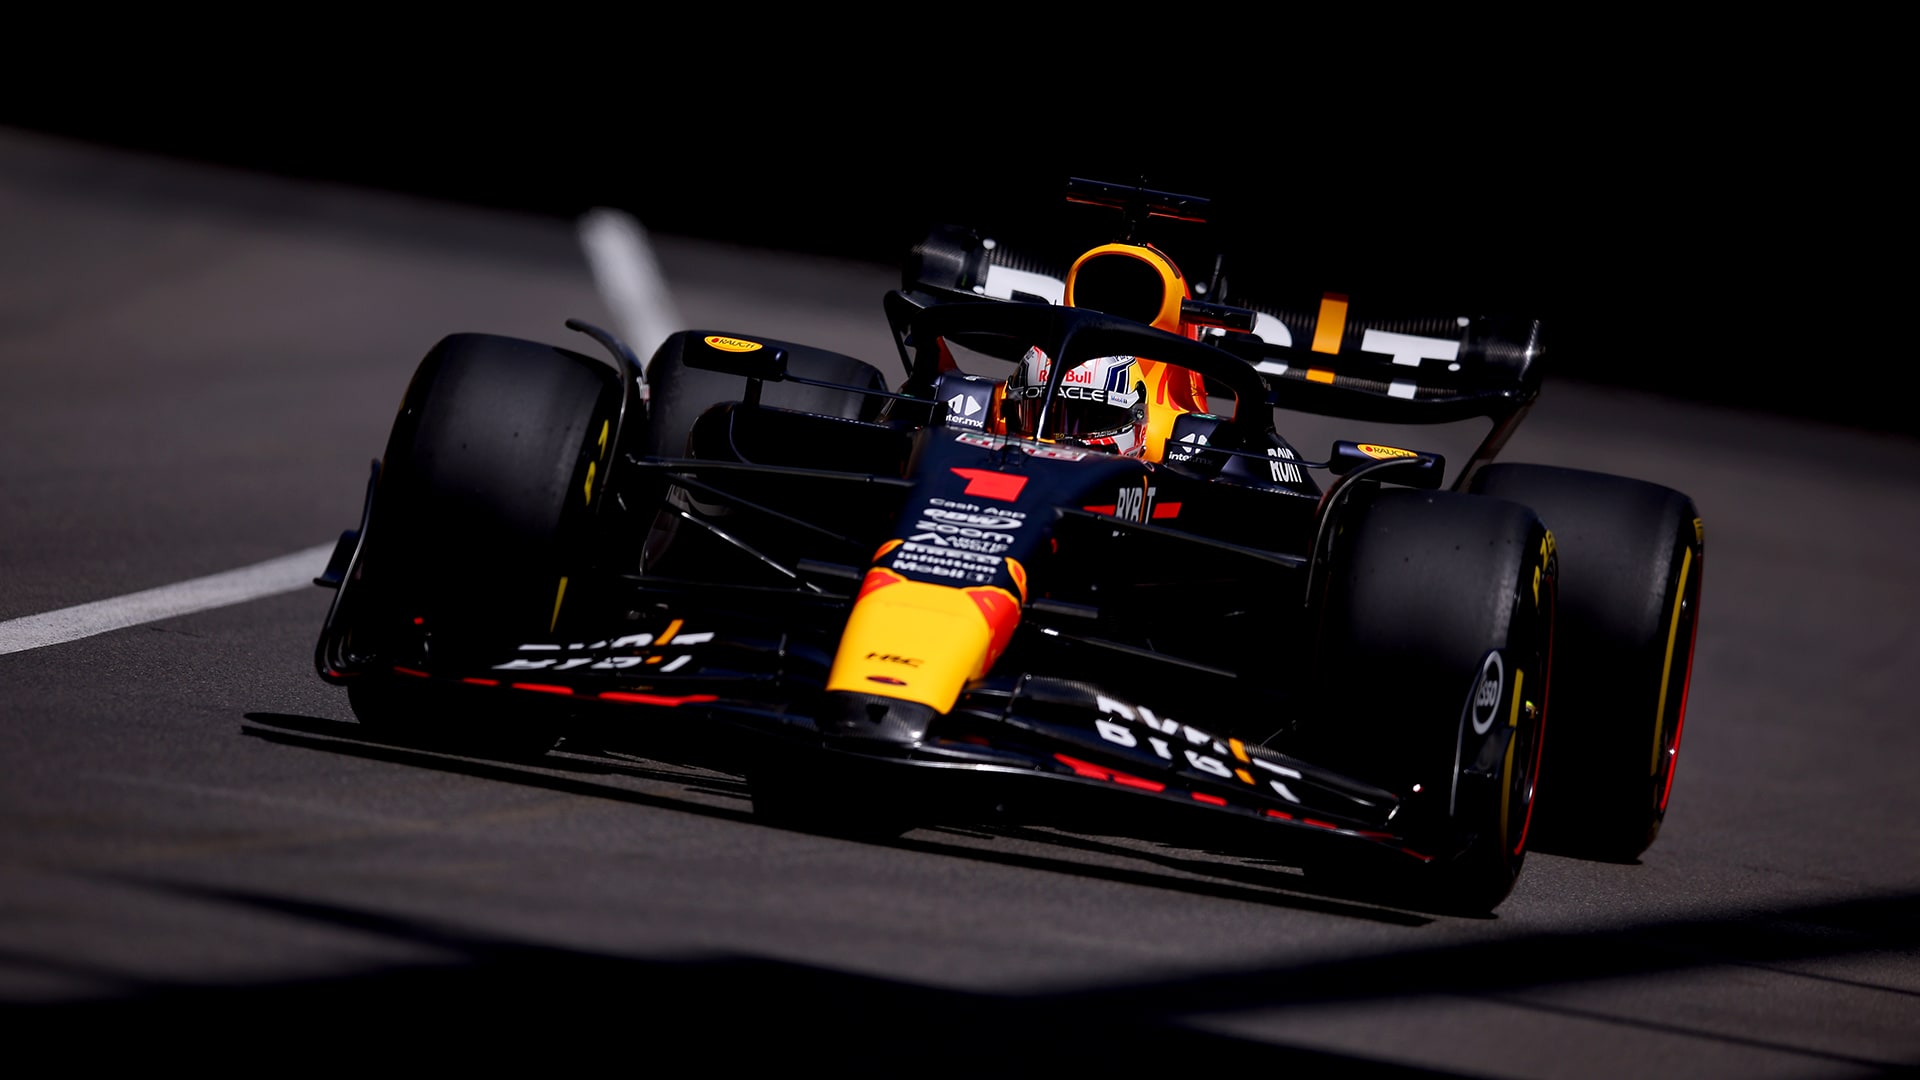 2023 Monaco Grand Prix FP2 report and highlights Verstappen leads Leclerc while Sainz crashes during ultra-close second practice in Monaco Formula 1®